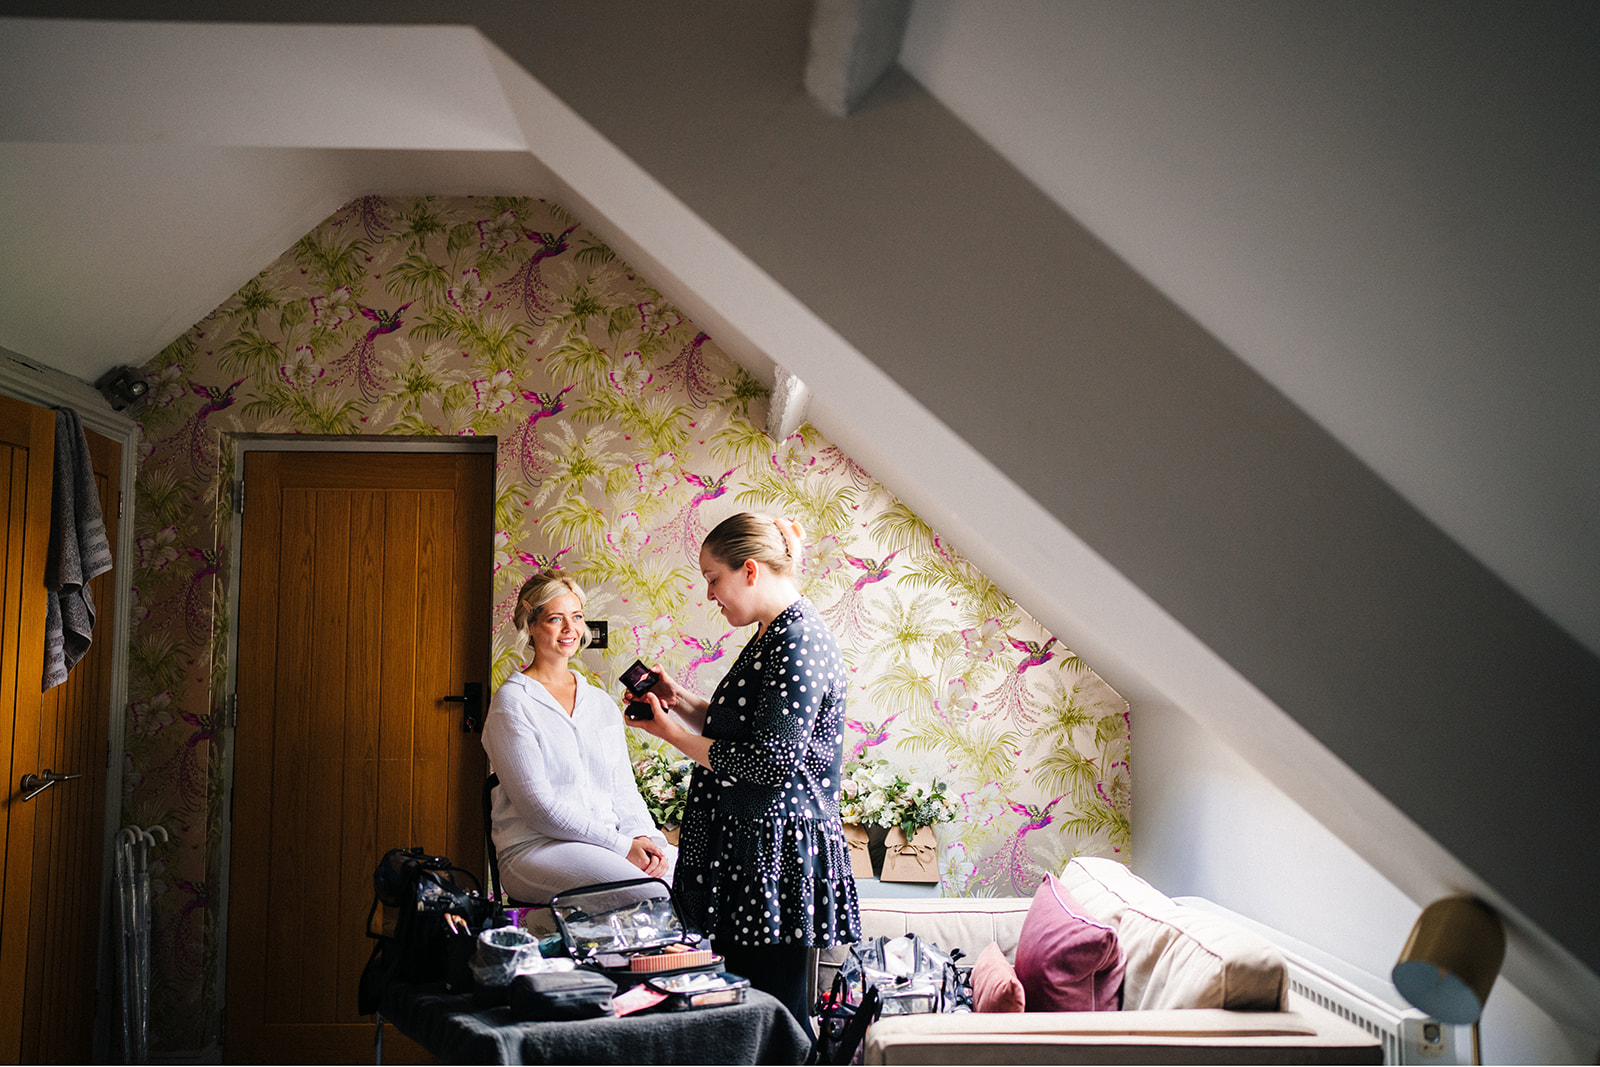 The Chequers Inn Wedding Photography - the bride, having her make-up done on the morning of her wedding